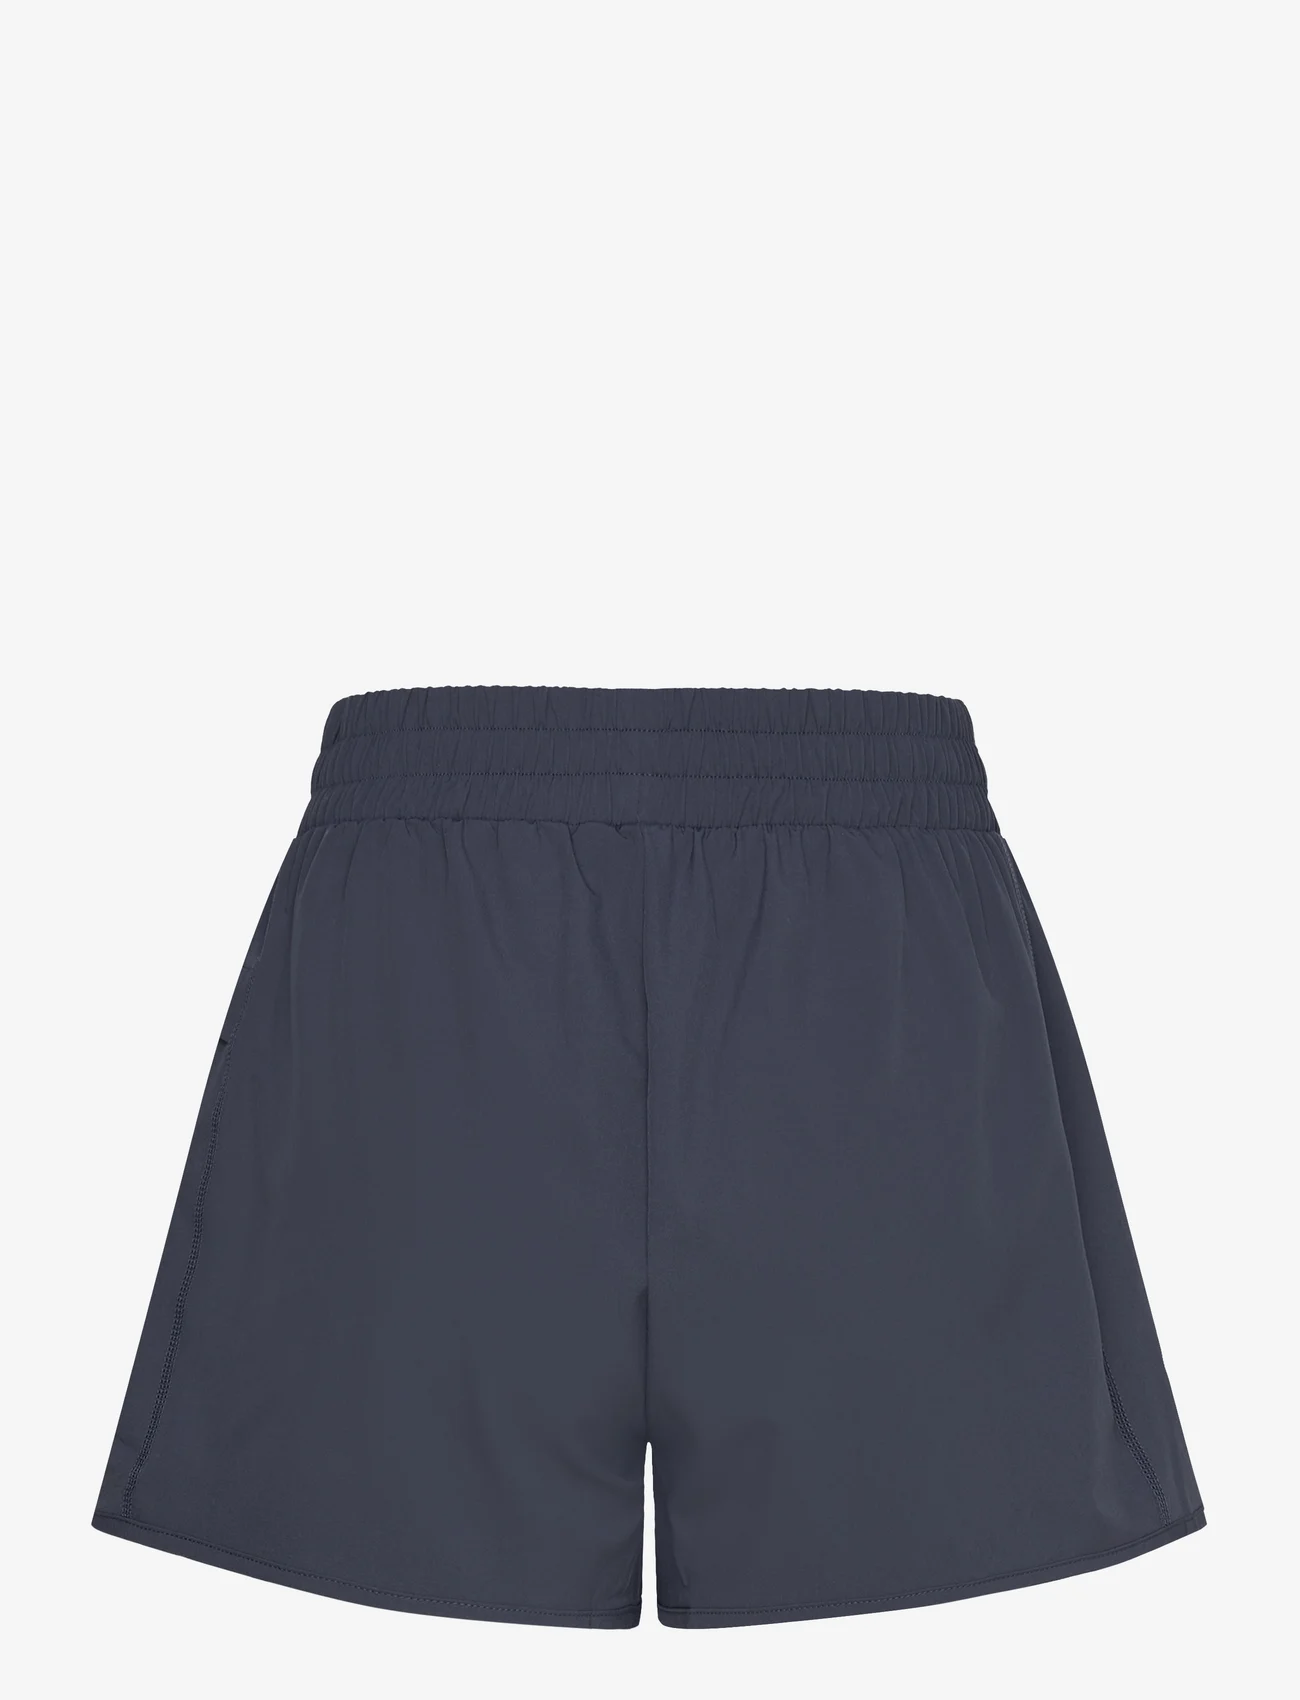 Björn Borg - BORG LOOSE SHORTS - trening shorts - outerspace - 1